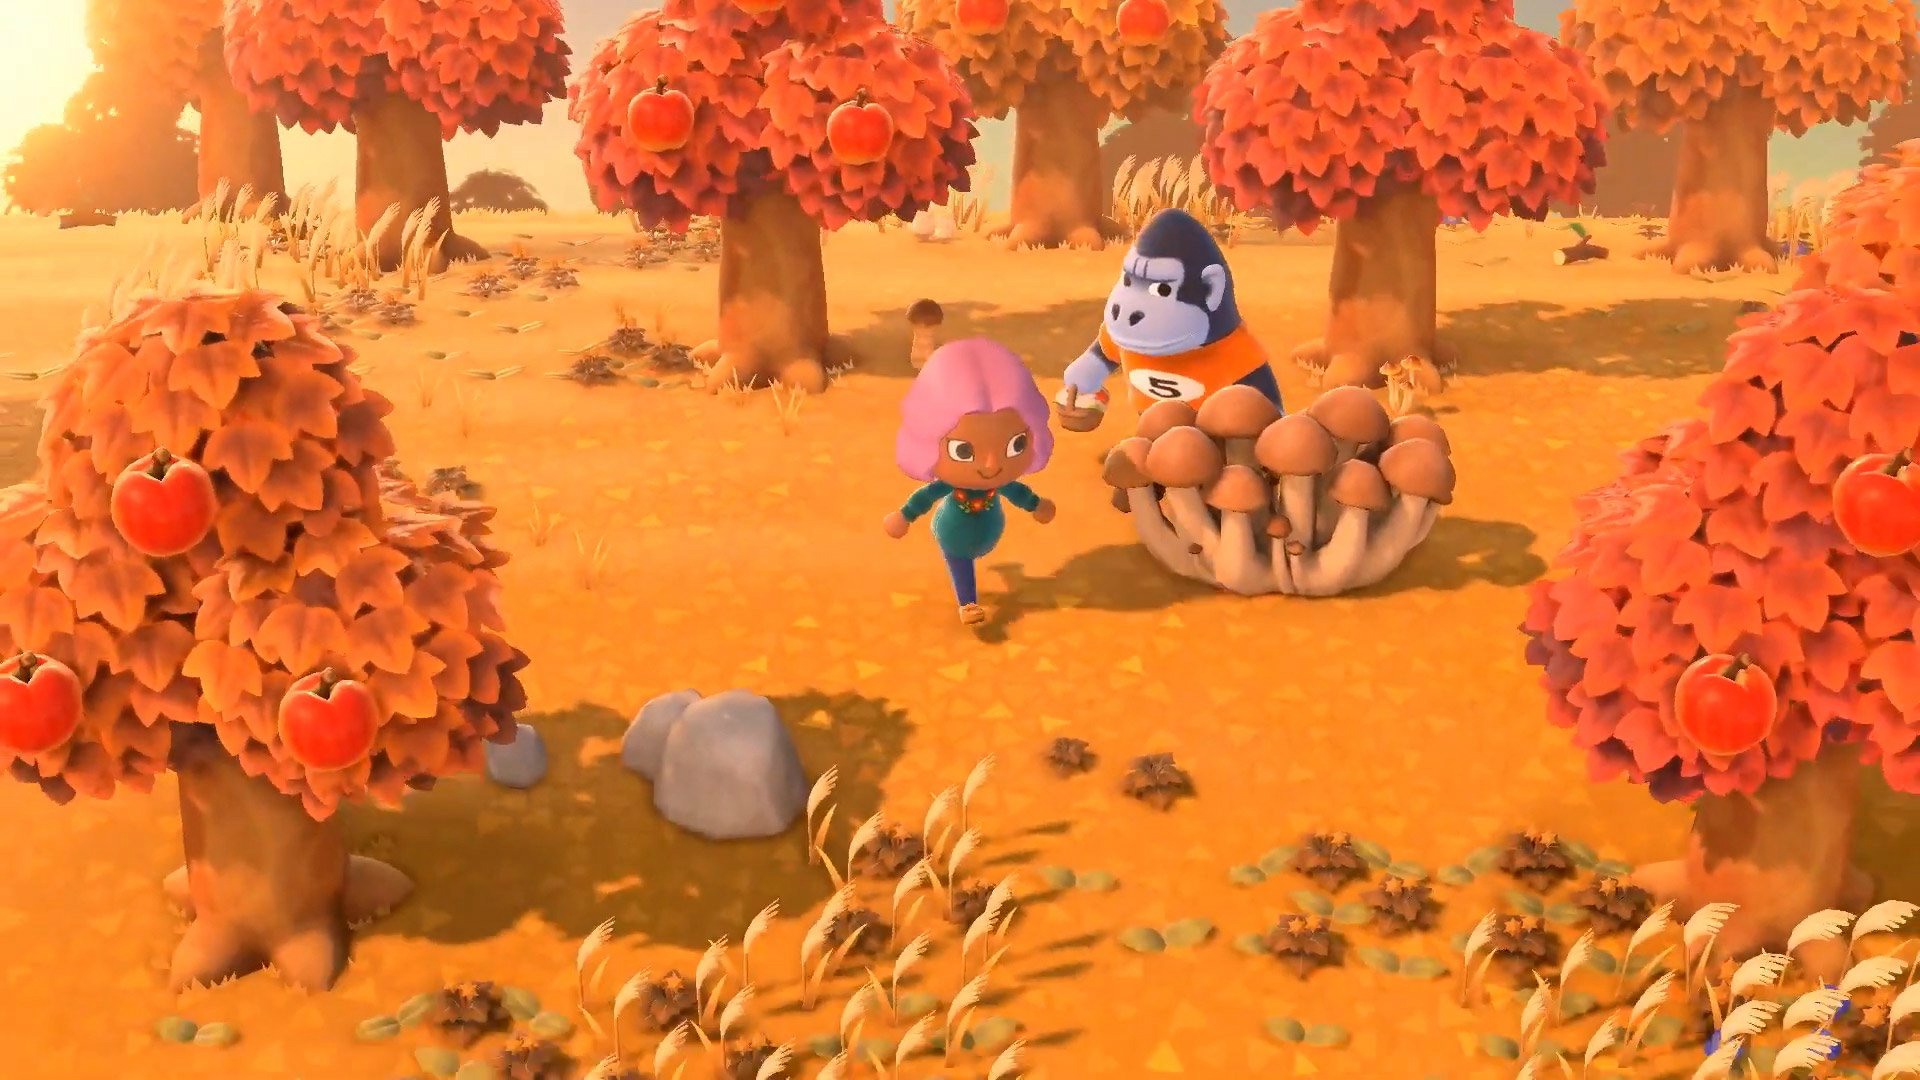 Animal Crossing: New Horizons overview trailer released